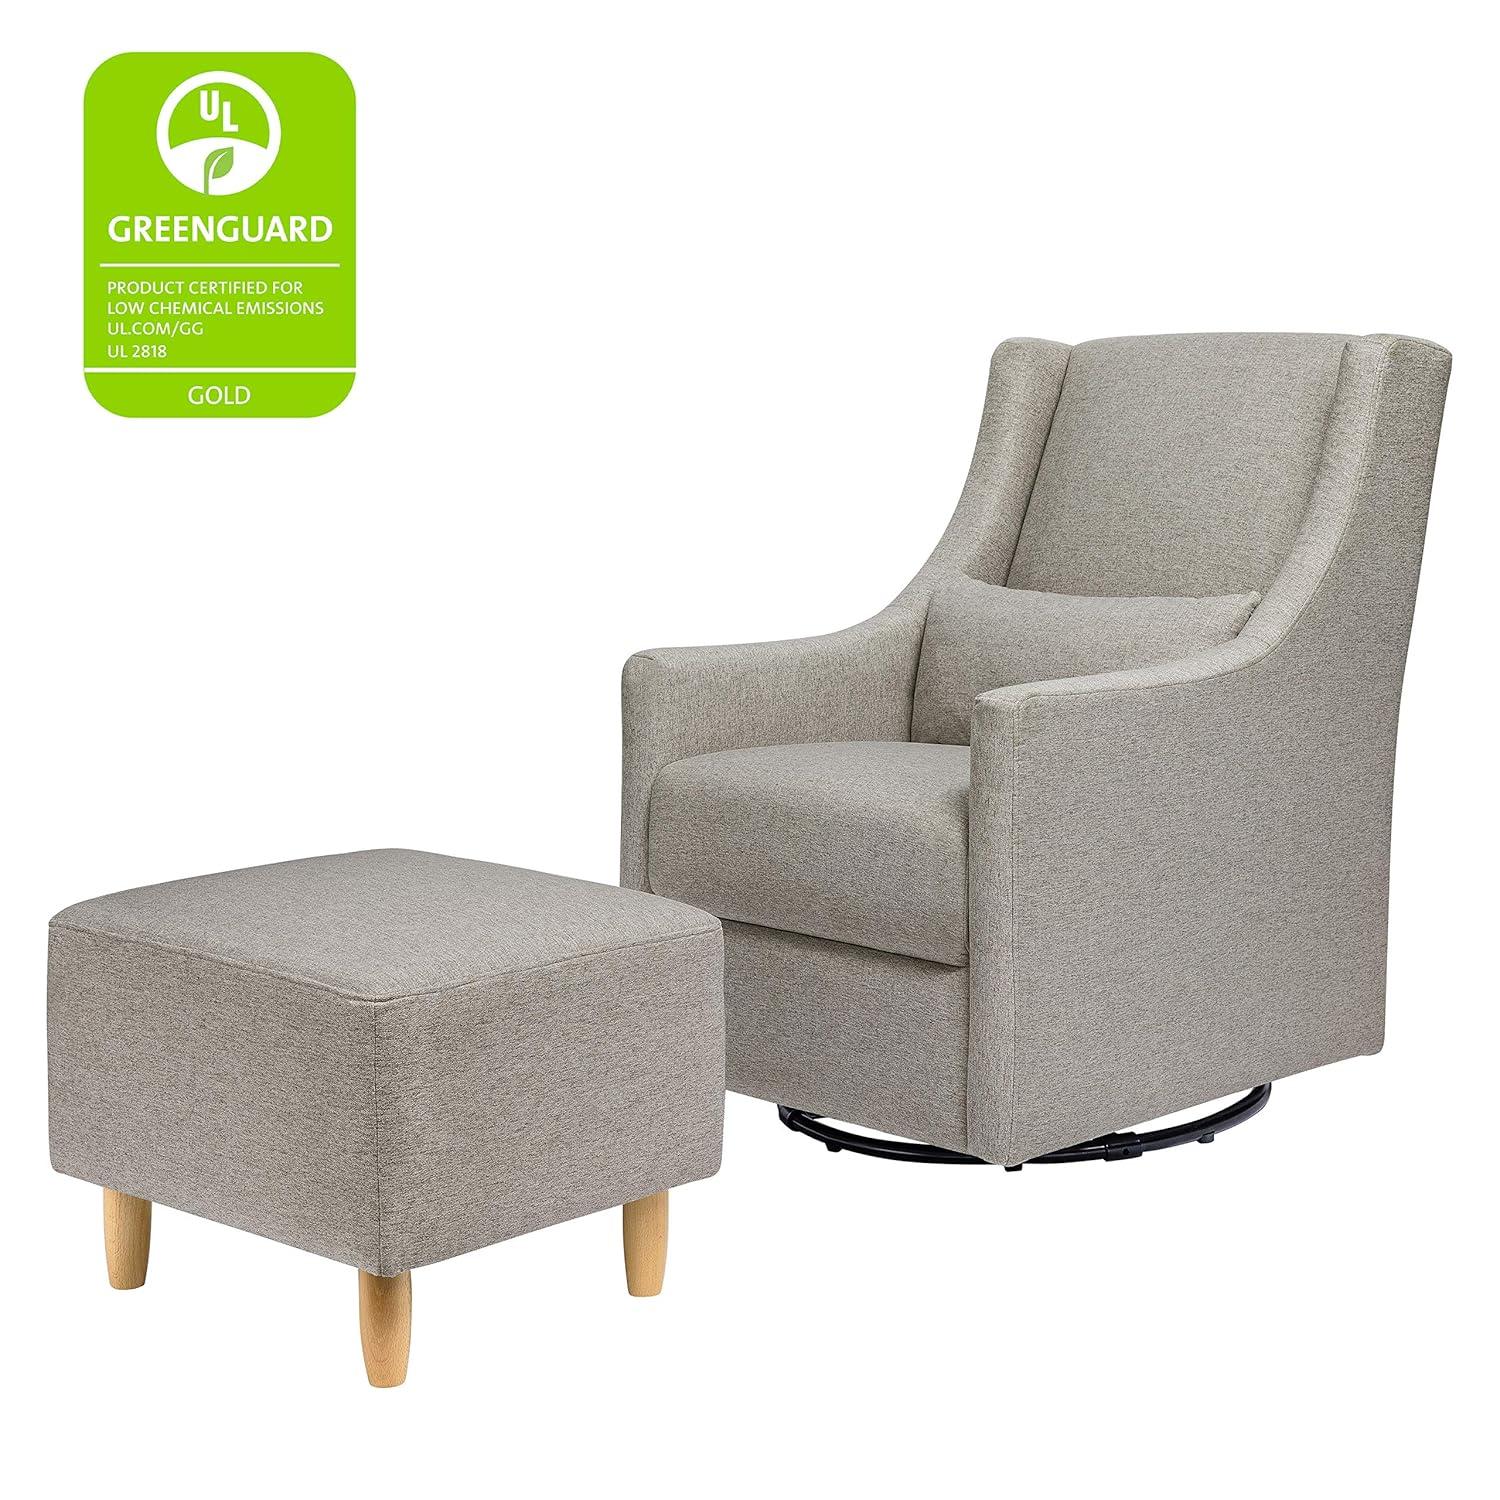 Eco-Weave Grey Swivel Glider with Ottoman for Modern Nurseries